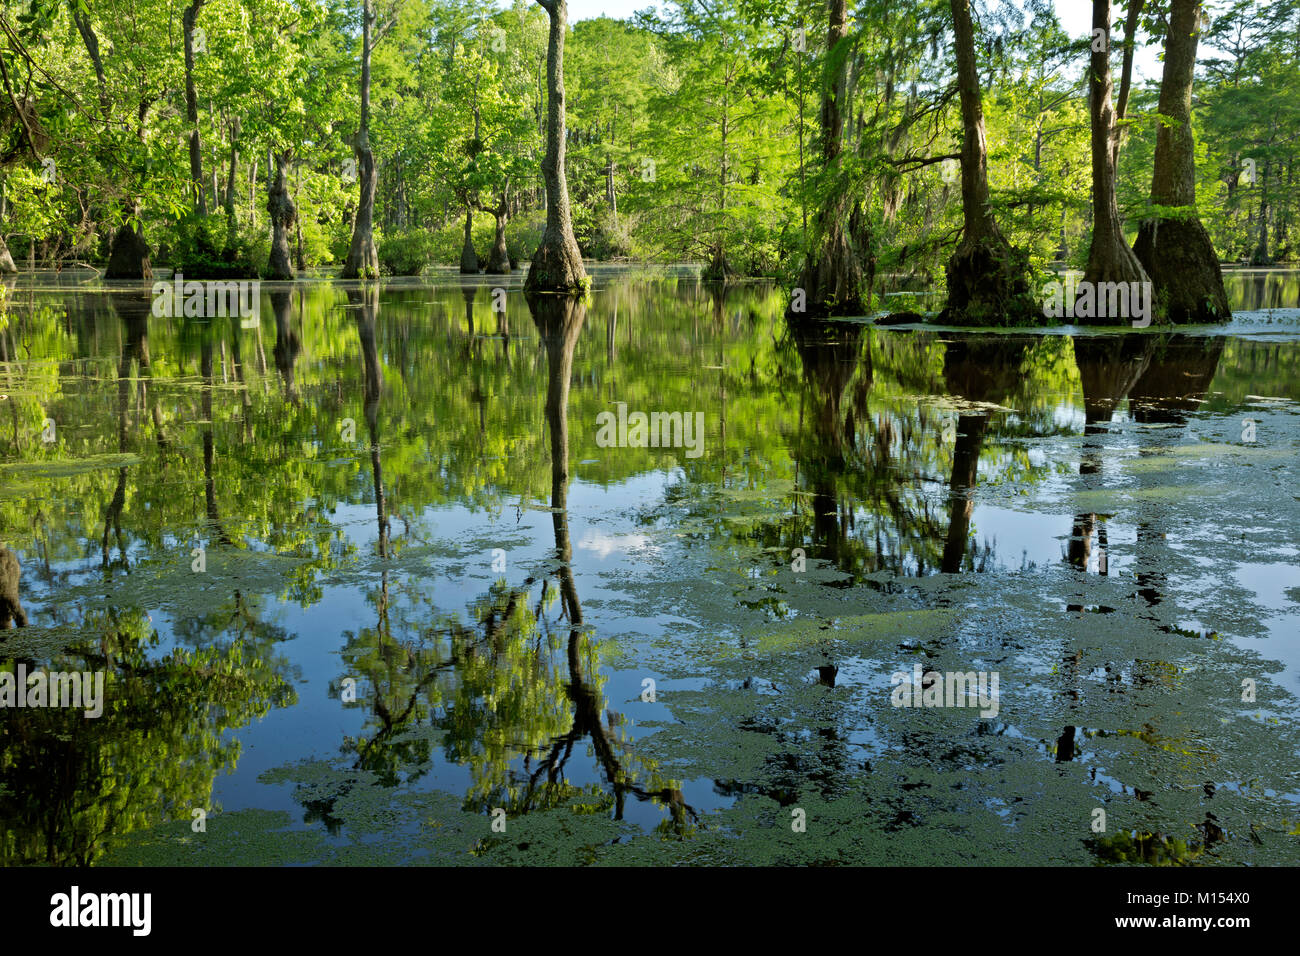 NC01471-00...NORTH CAROLINA - Bald cypress and tupalo gum trees reflecting in the still waters of Merchant Millpond; at Merchant Millpond State Park. Stock Photo